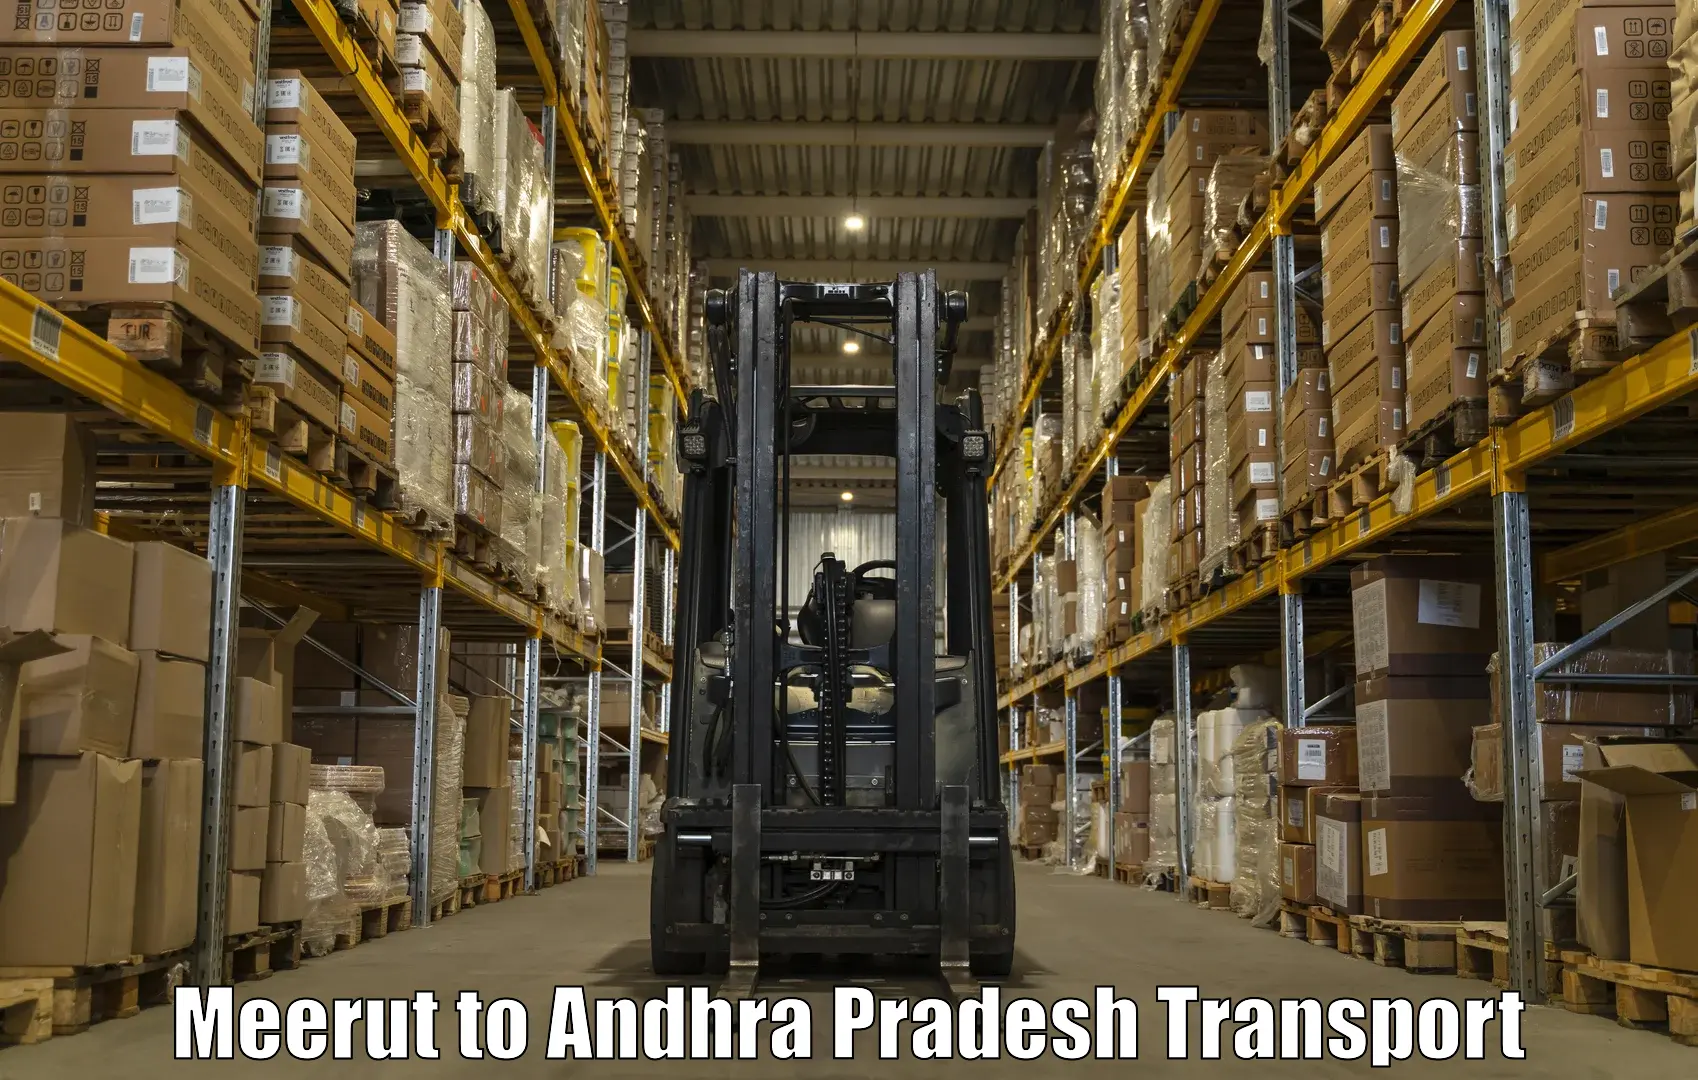 Part load transport service in India Meerut to Visakhapatnam